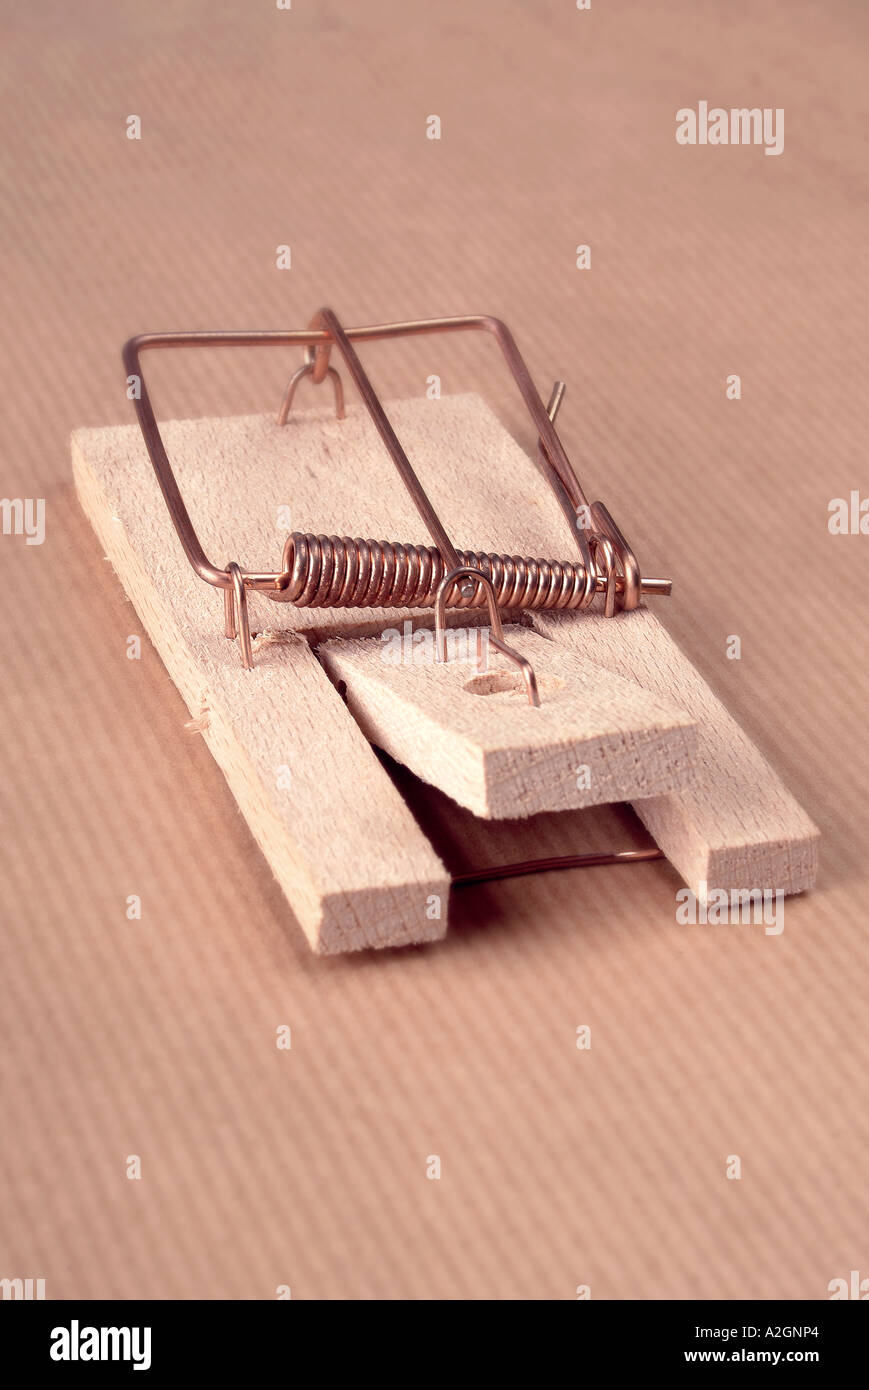 mouse trap Mausefalle Stock Photo